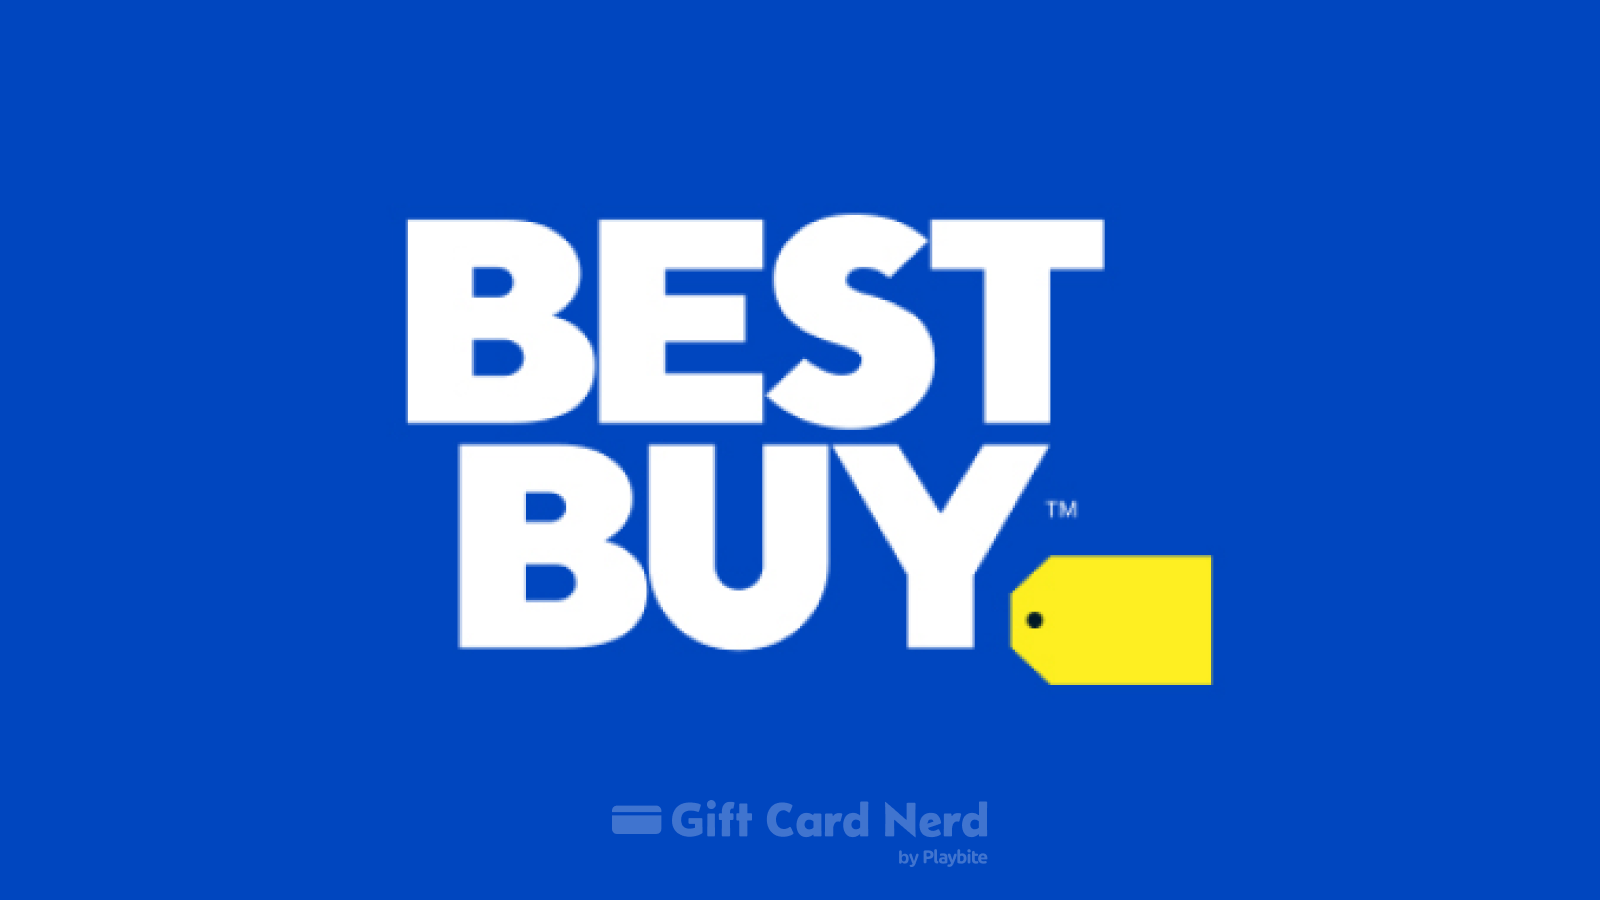 Can You Buy Best Buy Gift Cards at GameStop?